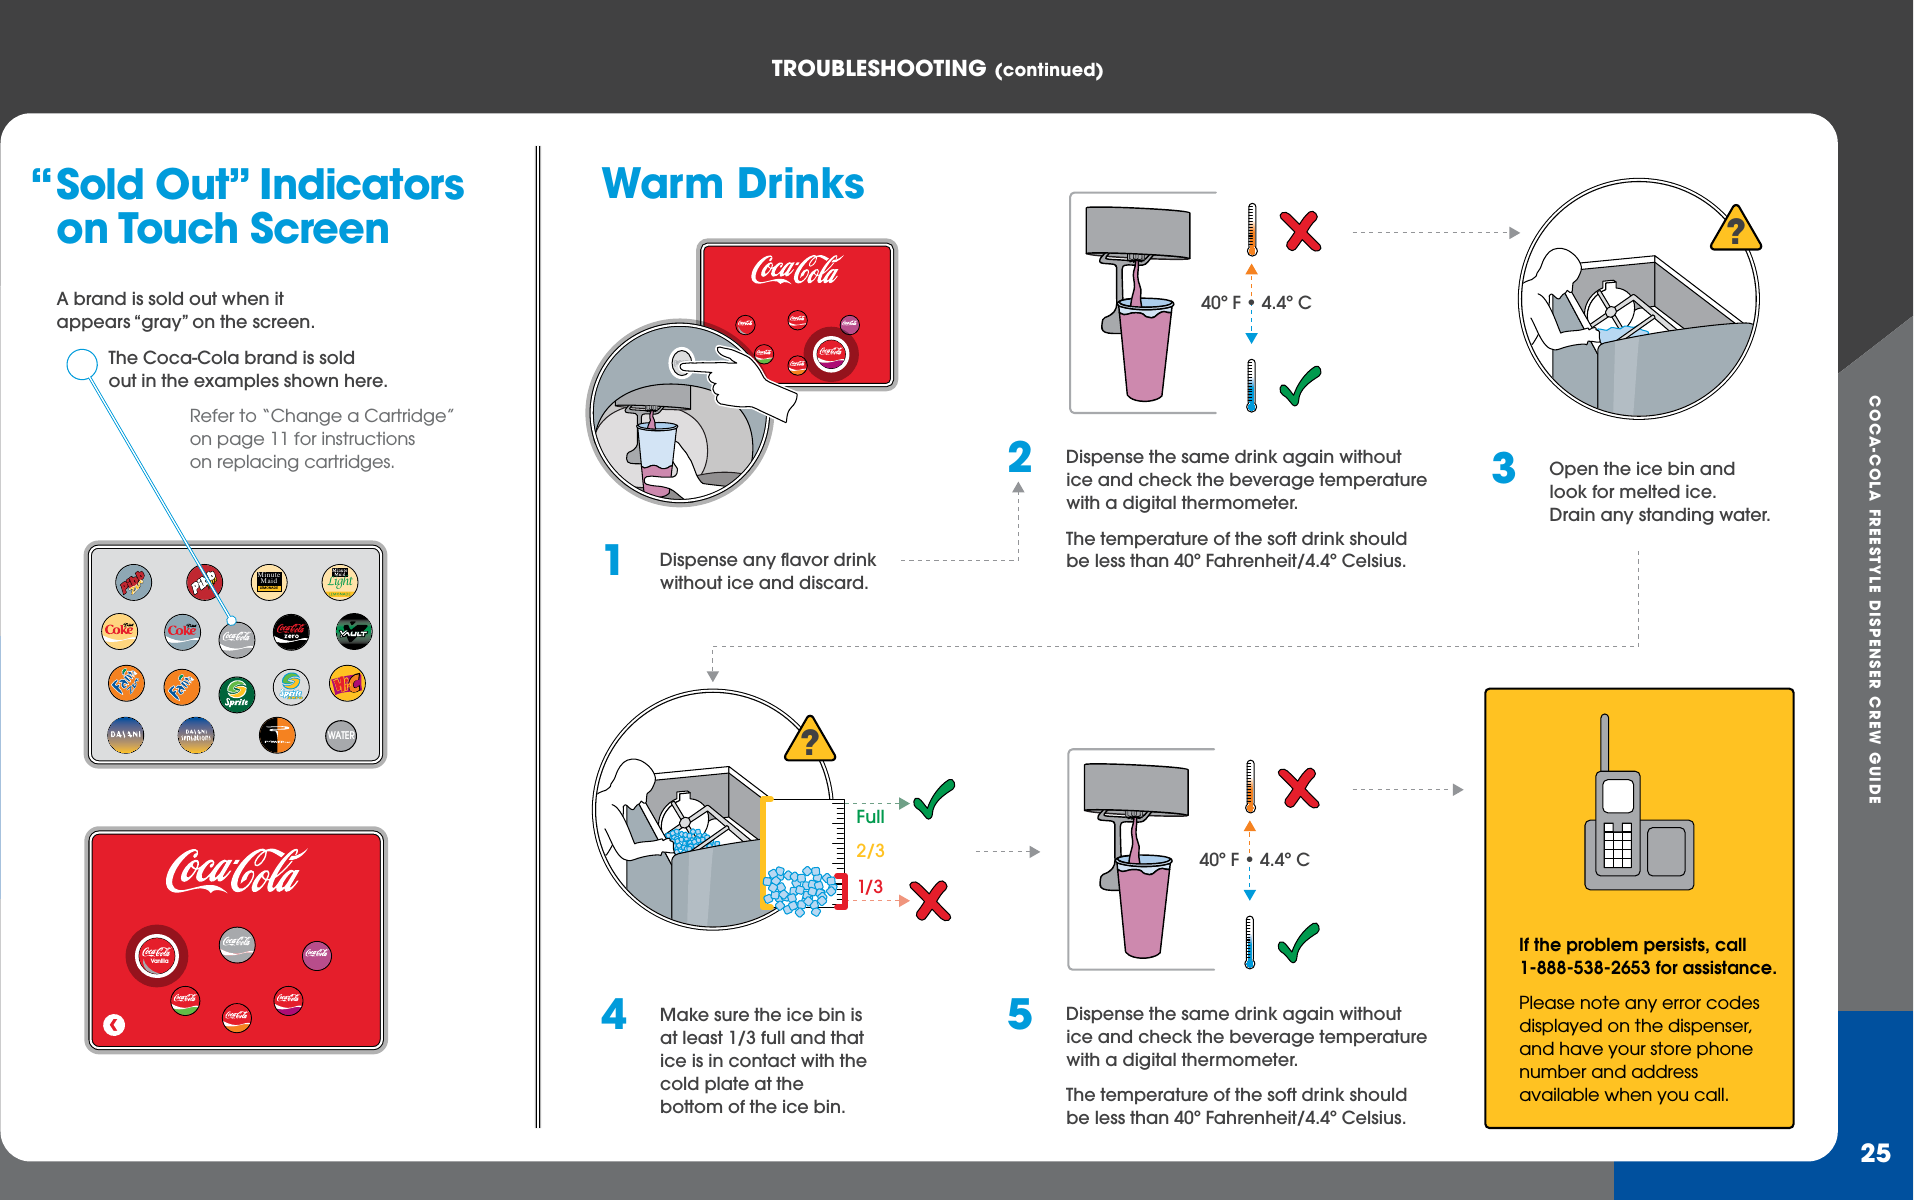 COCA-COLA FREESTYLE DISPENSER CREW GUIDETROUBLEShOOTING (continued)25Warm DrinksSold Out” Indicators     on Touch ScreenA brand is sold out when it appears “gray” on the screen.The Coca-Cola brand is sold out in the examples shown here.Refer to “Change a Cartridge” on page 11 for instructions on replacing cartridges.WATERMinuteMaidLEMONADELightVanilla1  Dispense any flavor drink without ice and discard.2  Dispense the same drink again without ice and check the beverage temperature with a digital thermometer.   The temperature of the soft drink should be less than 40º Fahrenheit/4.4º Celsius.3  Open the ice bin and look for melted ice.  Drain any standing water.4  Make sure the ice bin is at least 1/3 full and that ice is in contact with the cold plate at the bottom of the ice bin. If the problem persists, call 1-888-538-2653 for assistance.    Please note any error codes displayed on the dispenser, and have your store phone number and address available when you call.&amp;s#??1/32/3Full5  Dispense the same drink again without ice and check the beverage temperature with a digital thermometer.   The temperature of the soft drink should be less than 40º Fahrenheit/4.4º Celsius.&amp;s#“